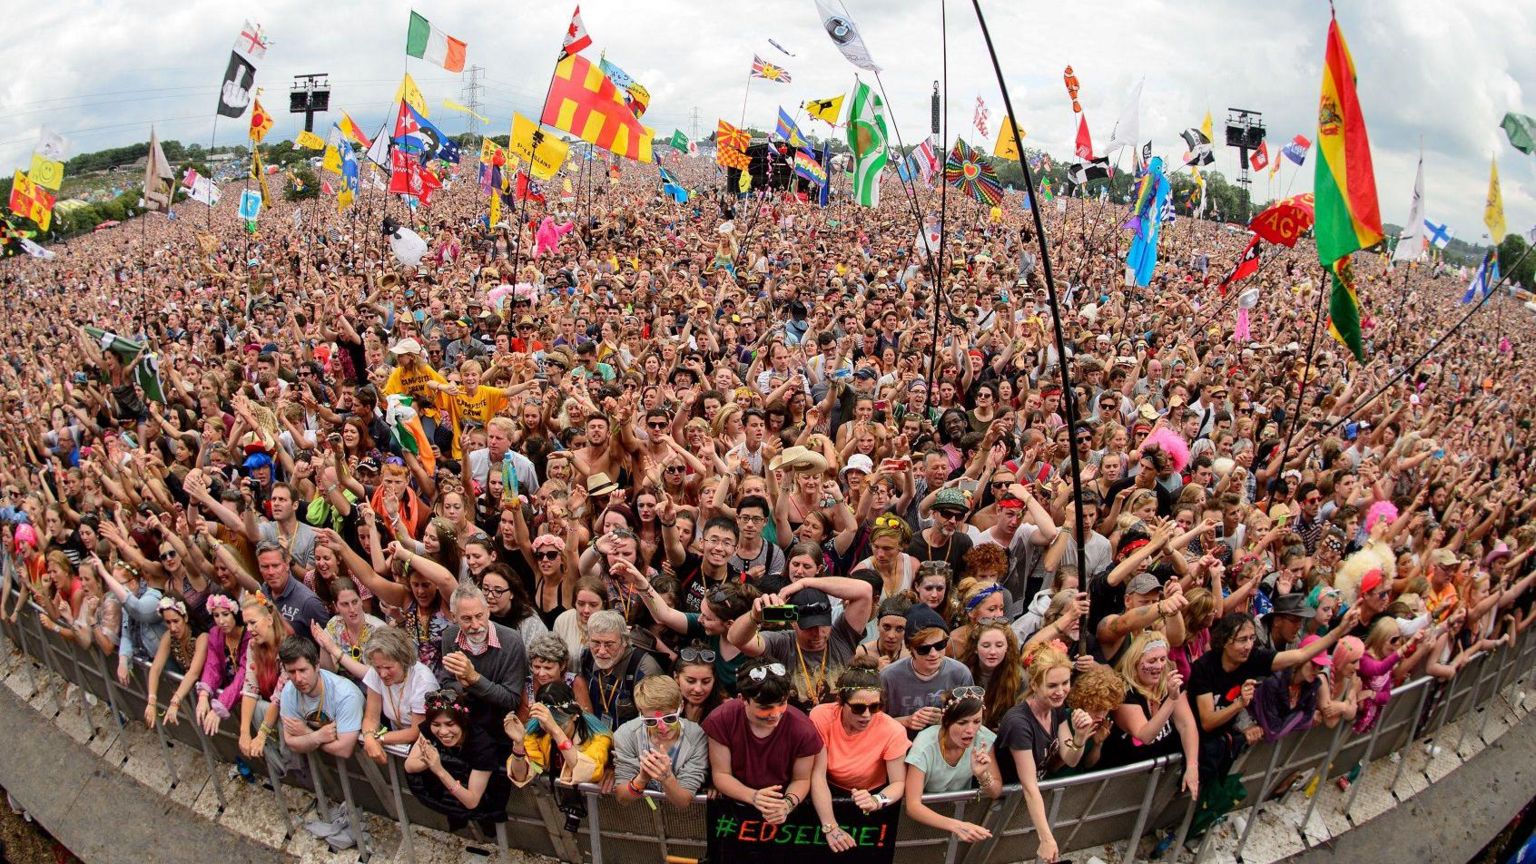 A large crowd packed in, in front of the Pyramid Stage at Glastonbury. People are leaning on the crash barrier and also waving flags